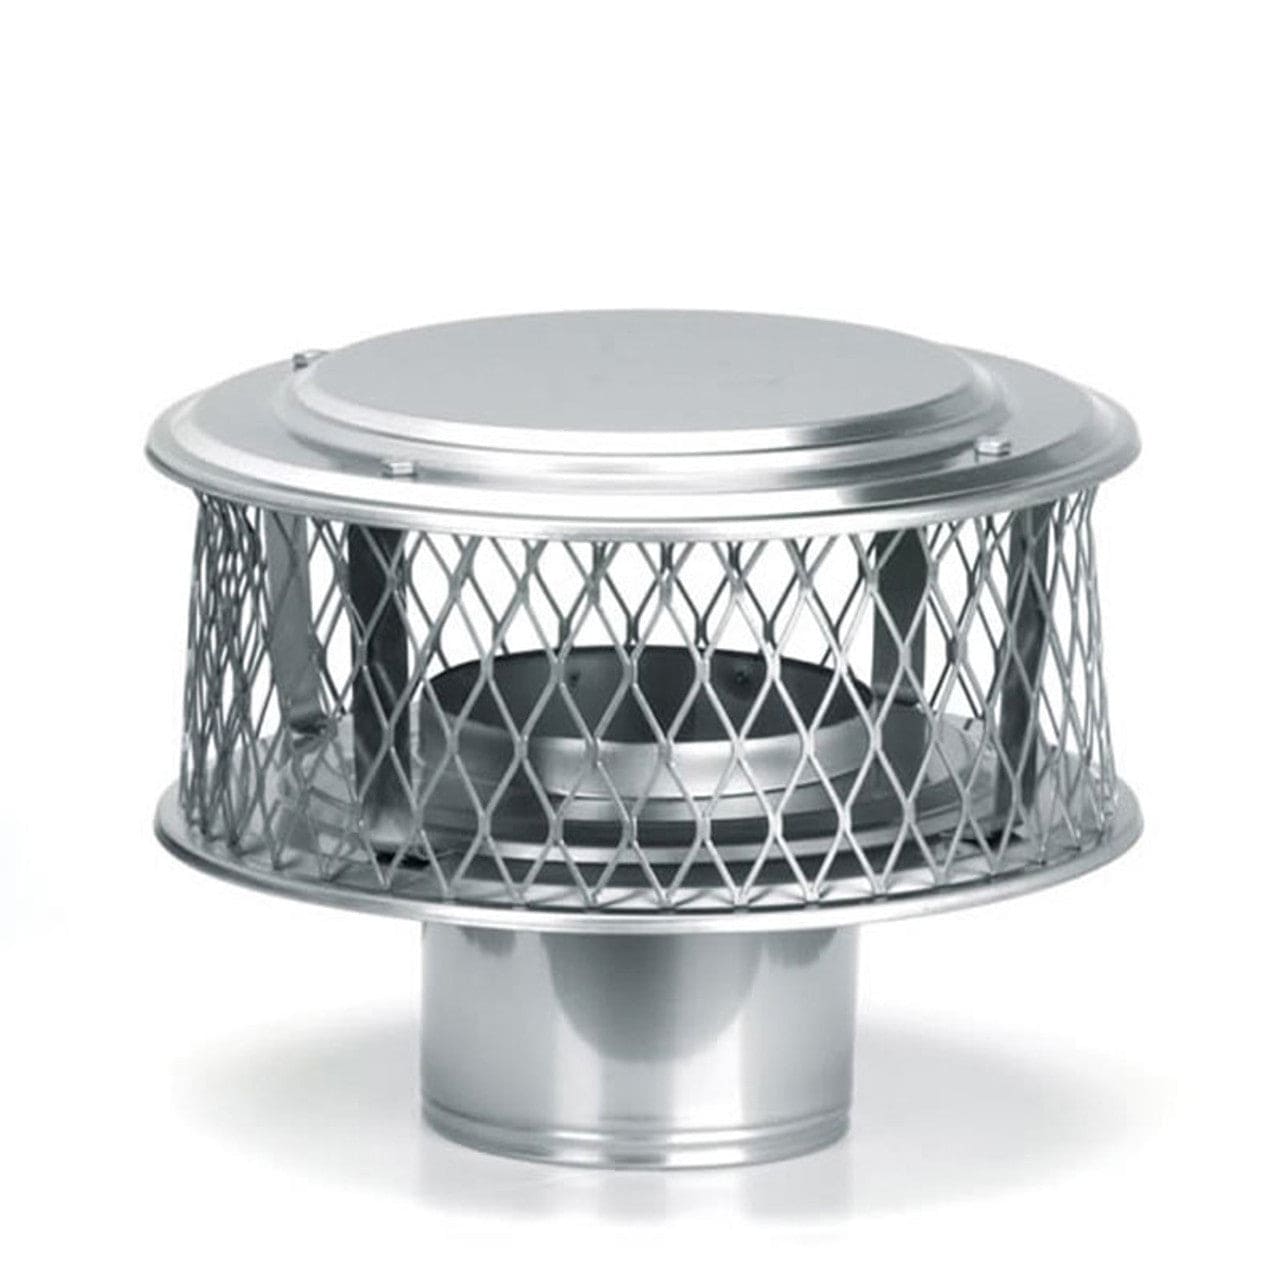 12" HomeSaver 304-Alloy Stainless Steel Guardian Cap with 5/8" Mesh - Chimney Cricket